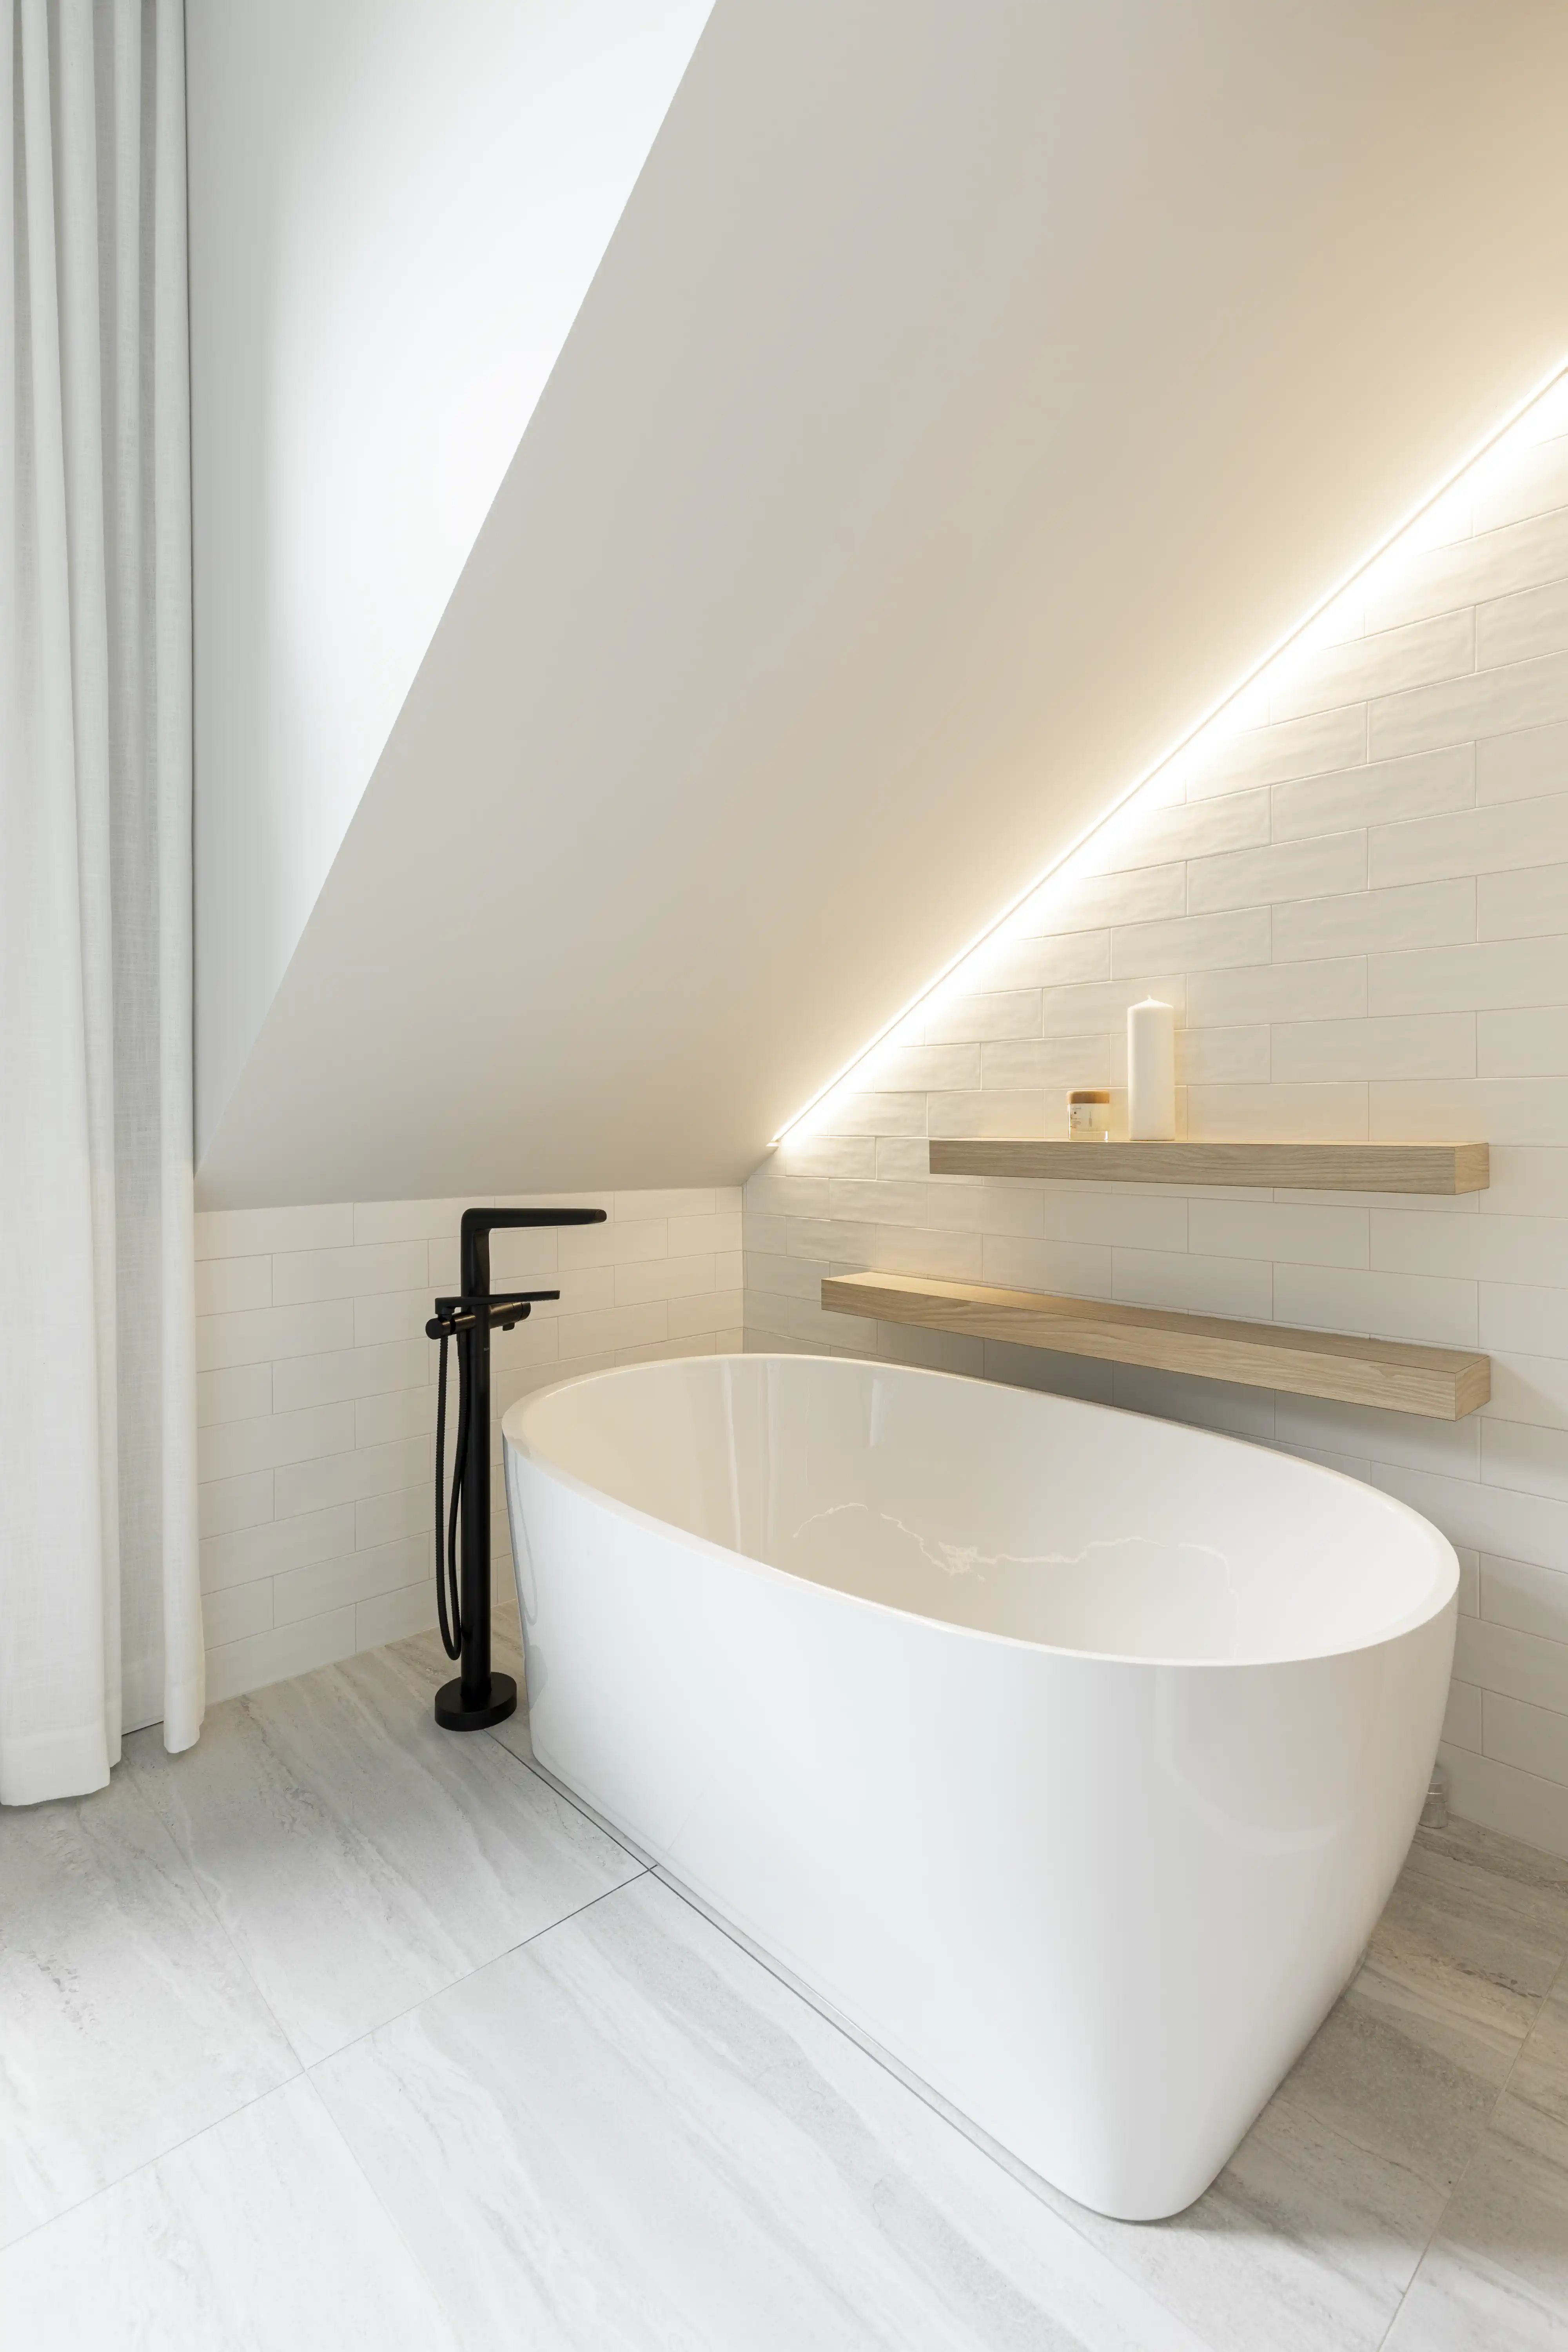 A white marble bathroom with a freestanding bathtub and a window, interior by Sarah Brown Design